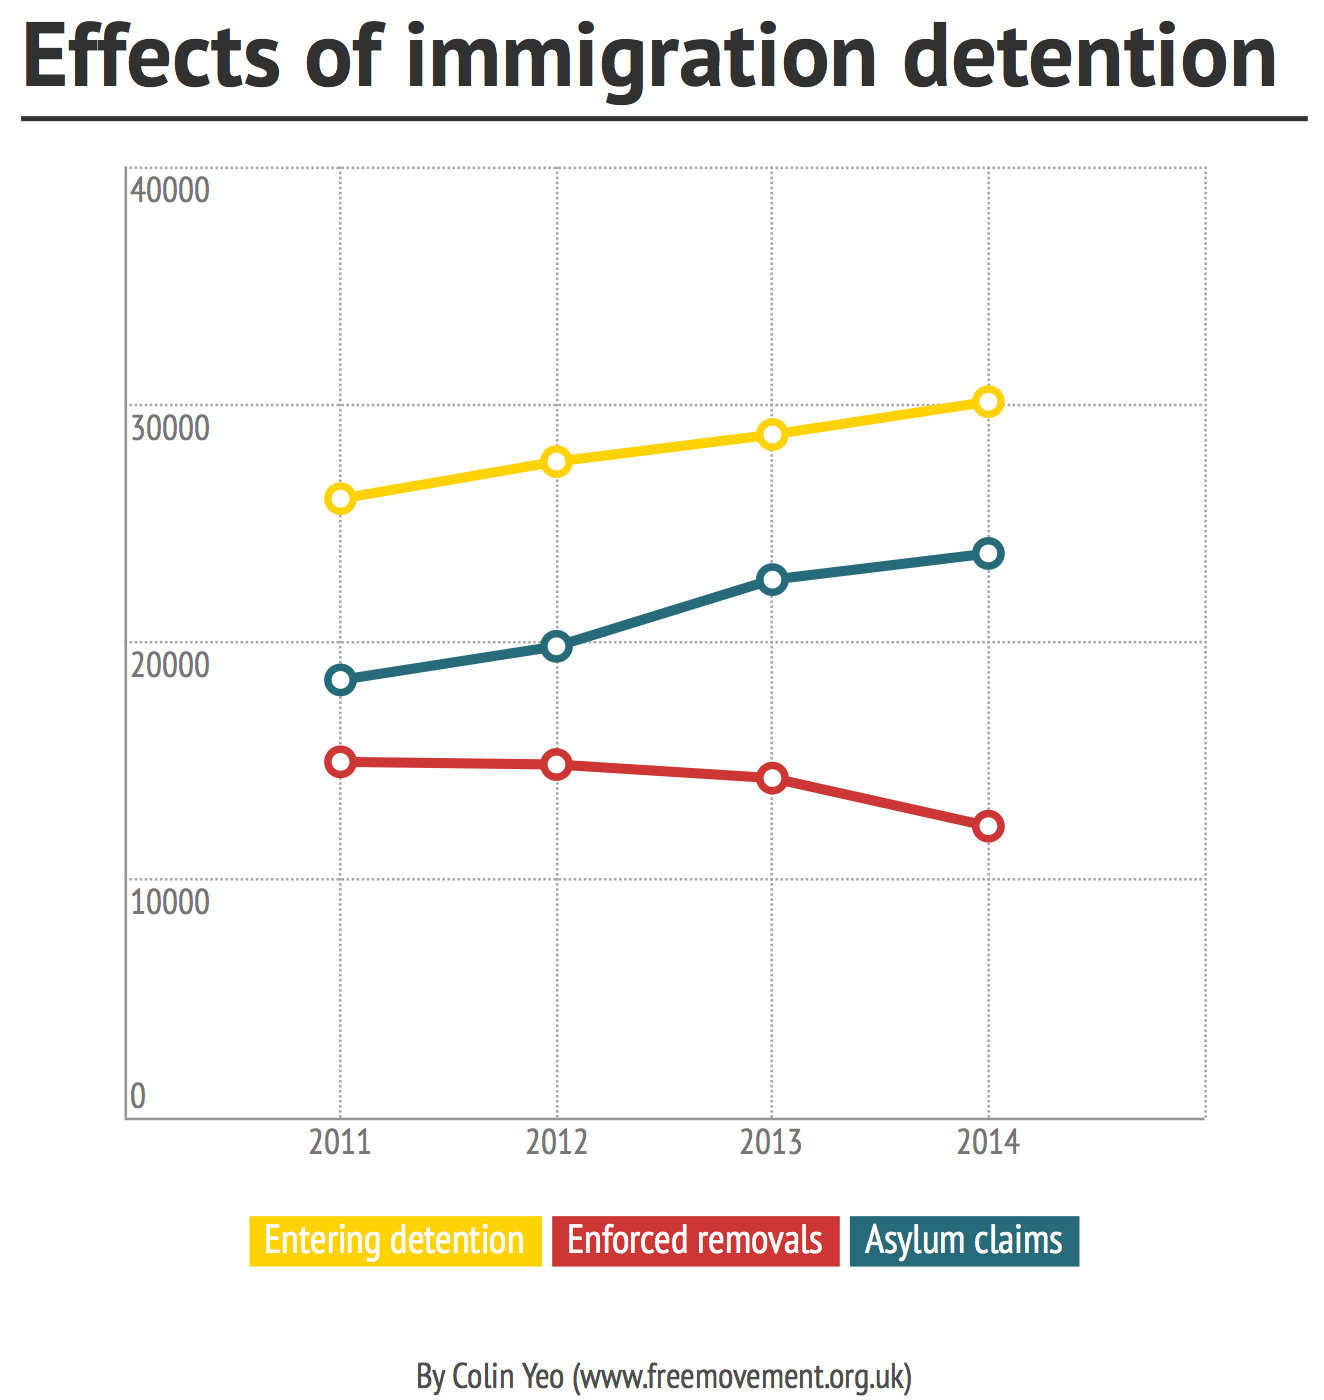 Does detention increase removals and decrease asylum claims?